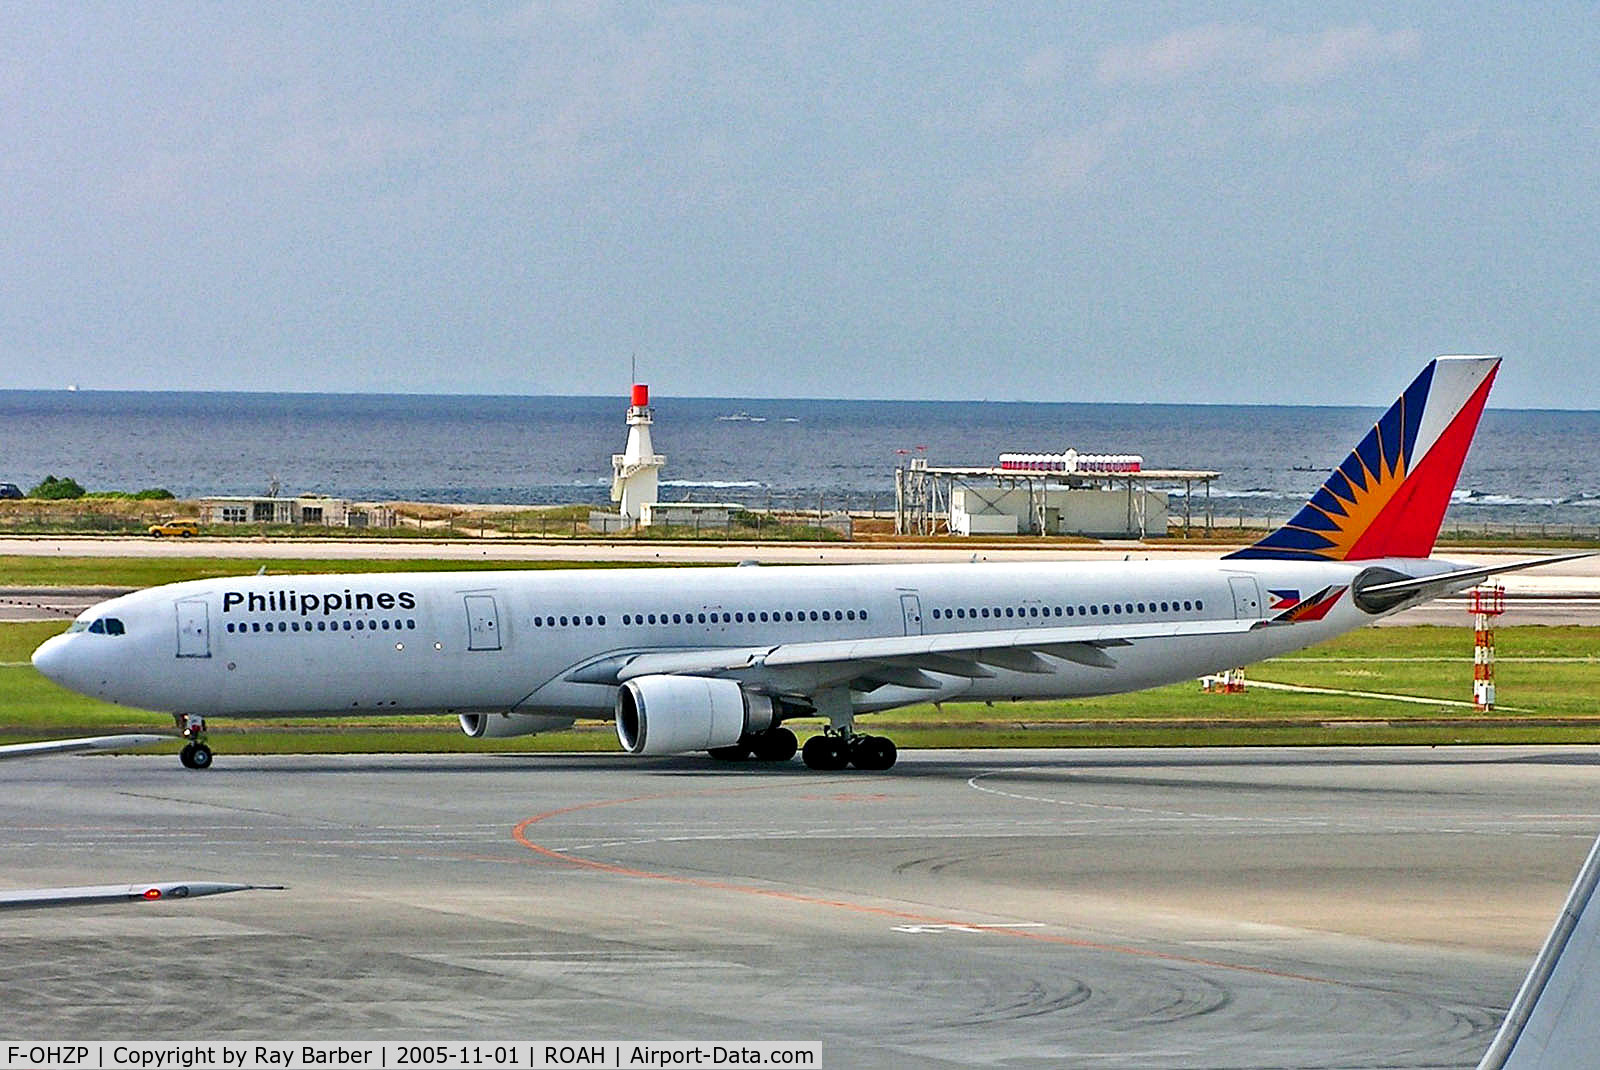 F-OHZP, Airbus A330-301 C/N 191, F-OHZP   Airbus A330-301 [191] (Philippine Airlines) Okinawa-Naha~JA 01/11/2005